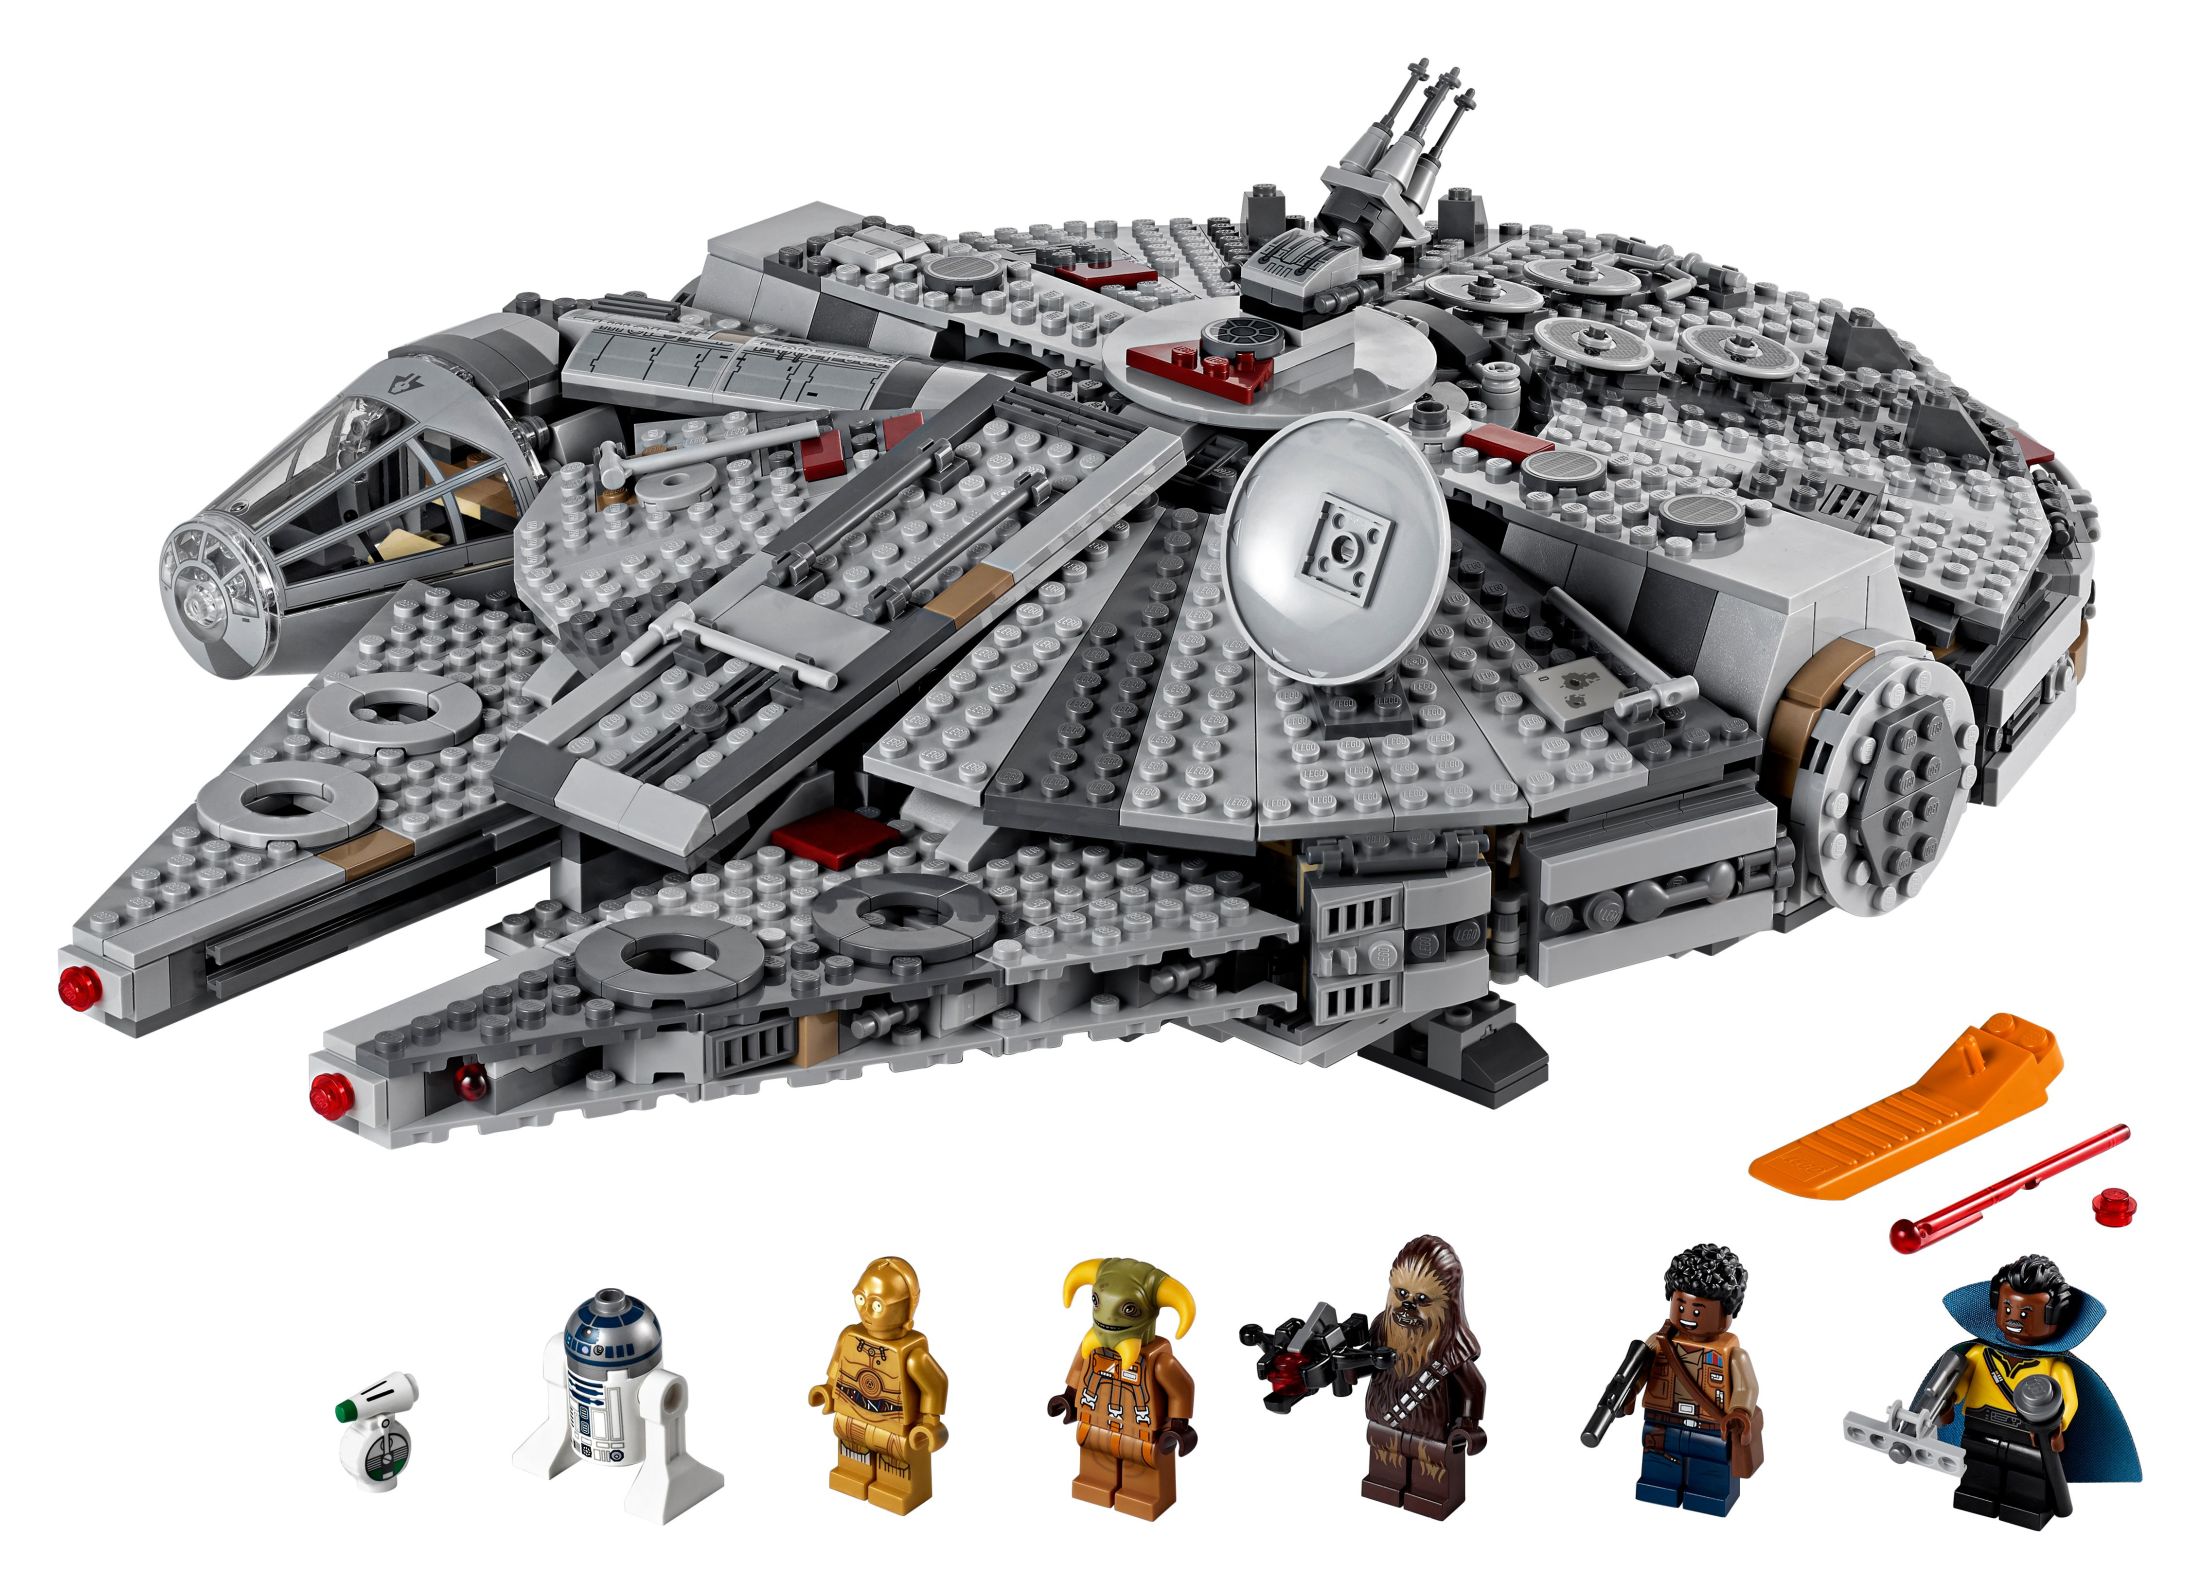 LEGO Star Wars Millennium Falcon 75257 Building Set - Starship Model with Finn, Chewbacca, Lando Calrissian, Boolio, C-3PO, R2-D2, and D-O Minifigures, The Rise of Skywalker Movie Collection - image 5 of 9